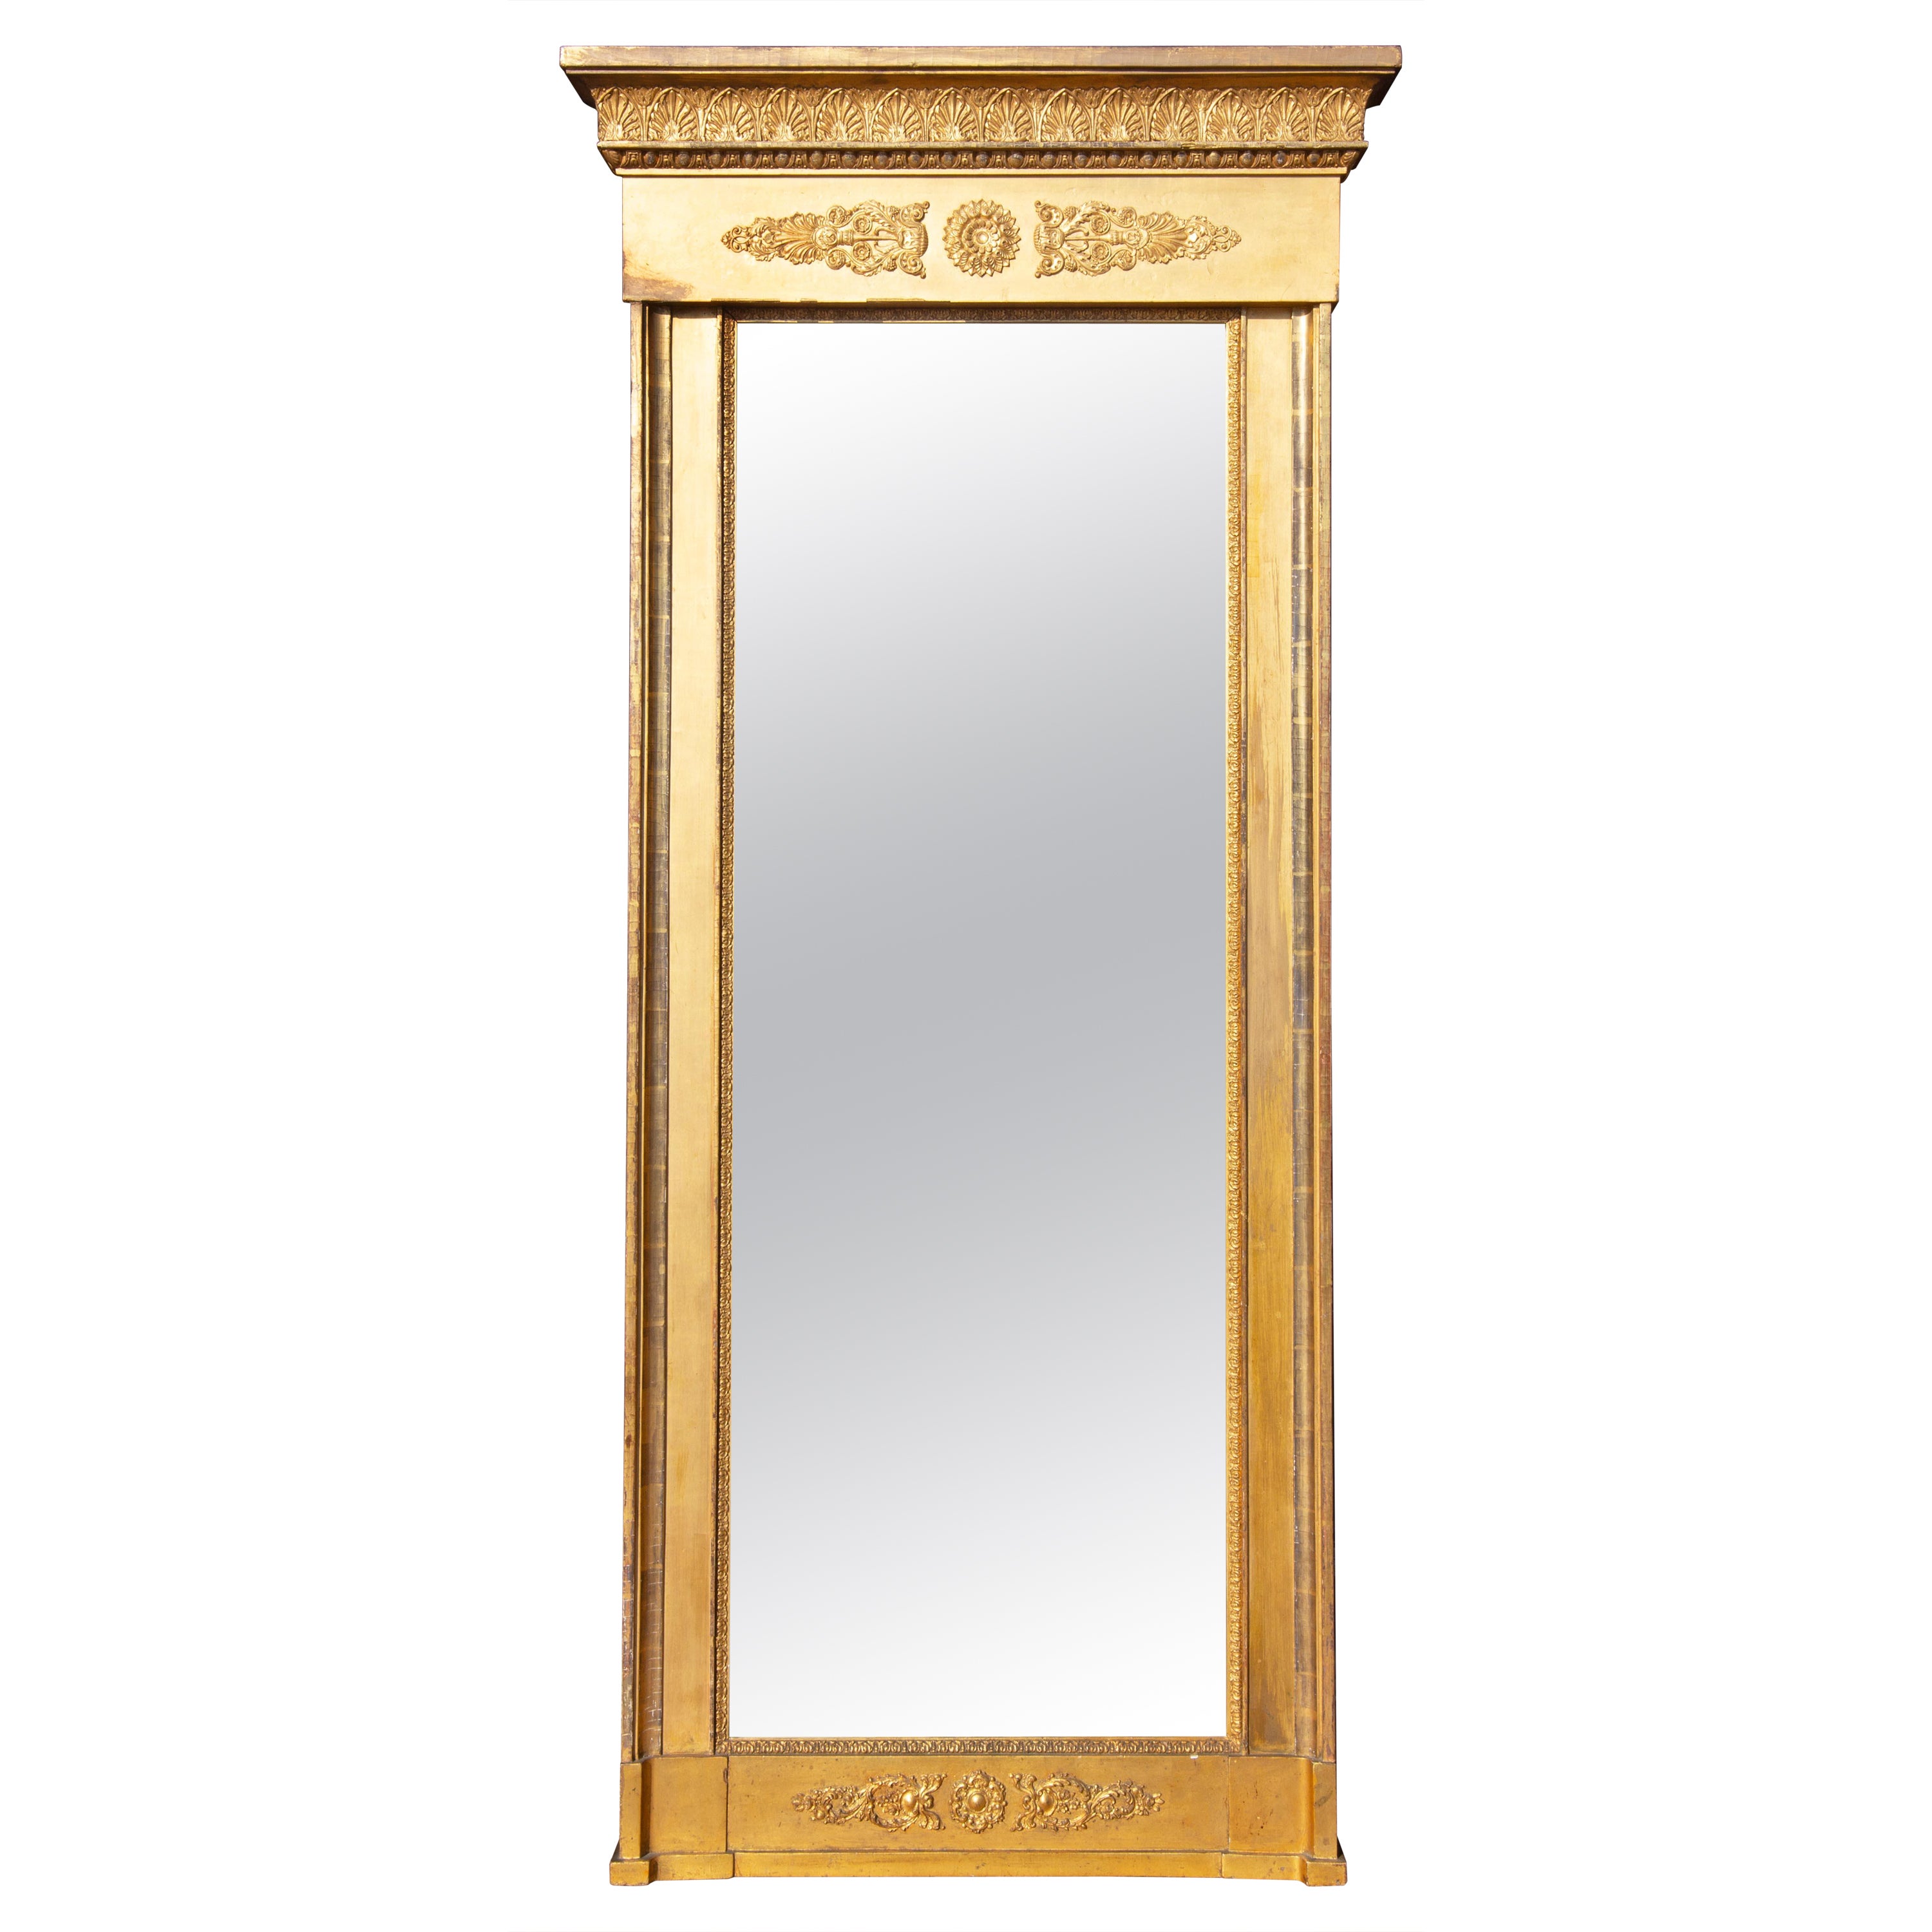 French Neoclassical Giltwood and Gilt-Gesso Pier Mirror, Circa 1820